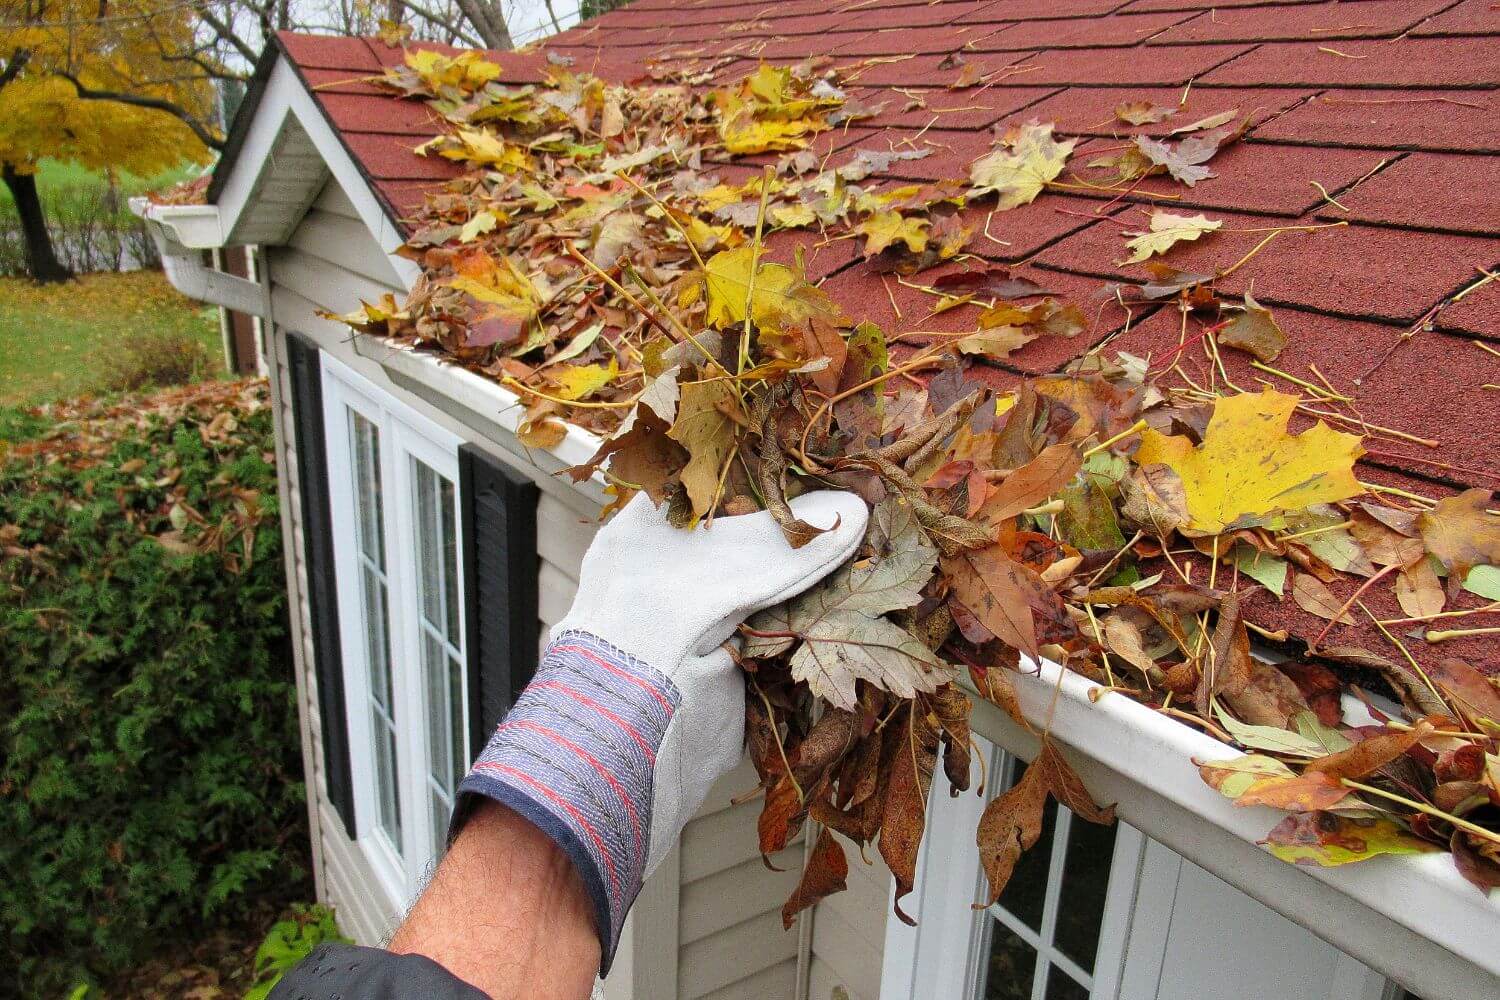 Residential gutter cleaning of leaves and debris from fall season